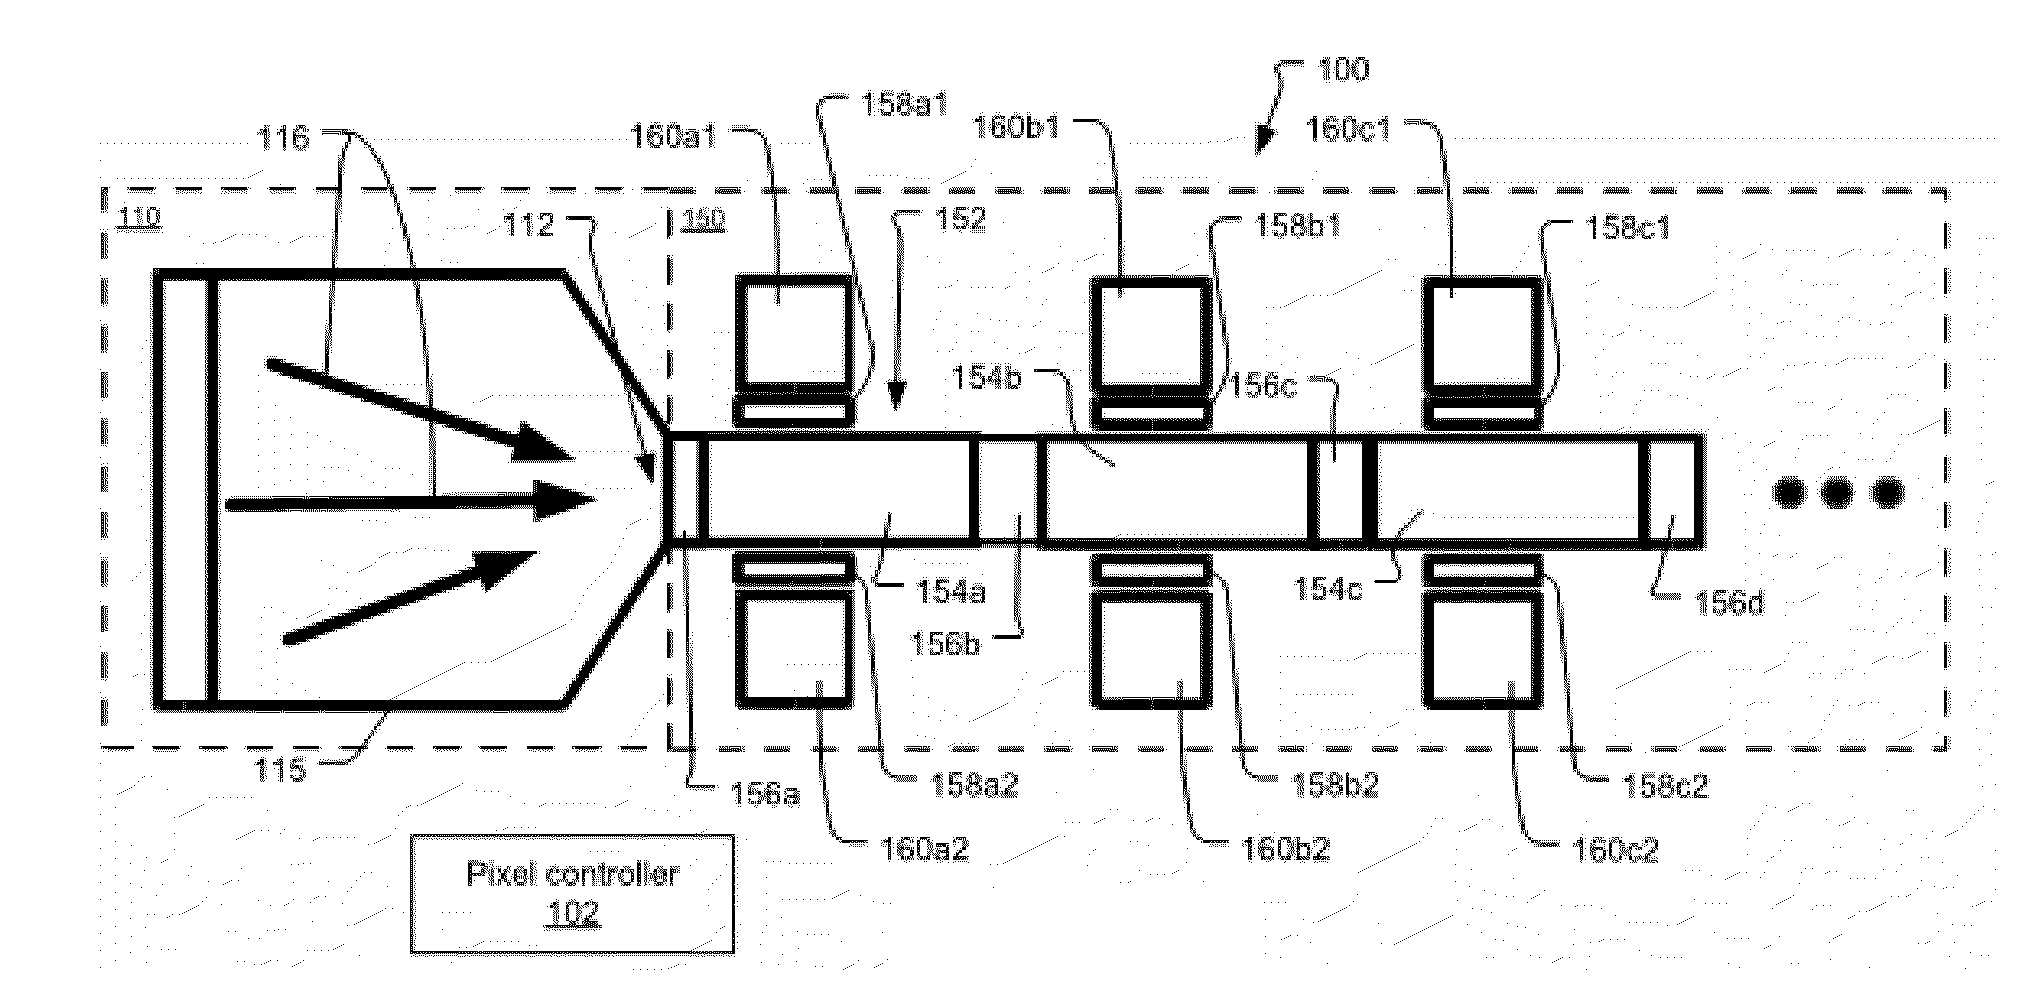 Demodulation Pixel with Daisy Chain Charge Storage Sites and Method of Operation Therefor